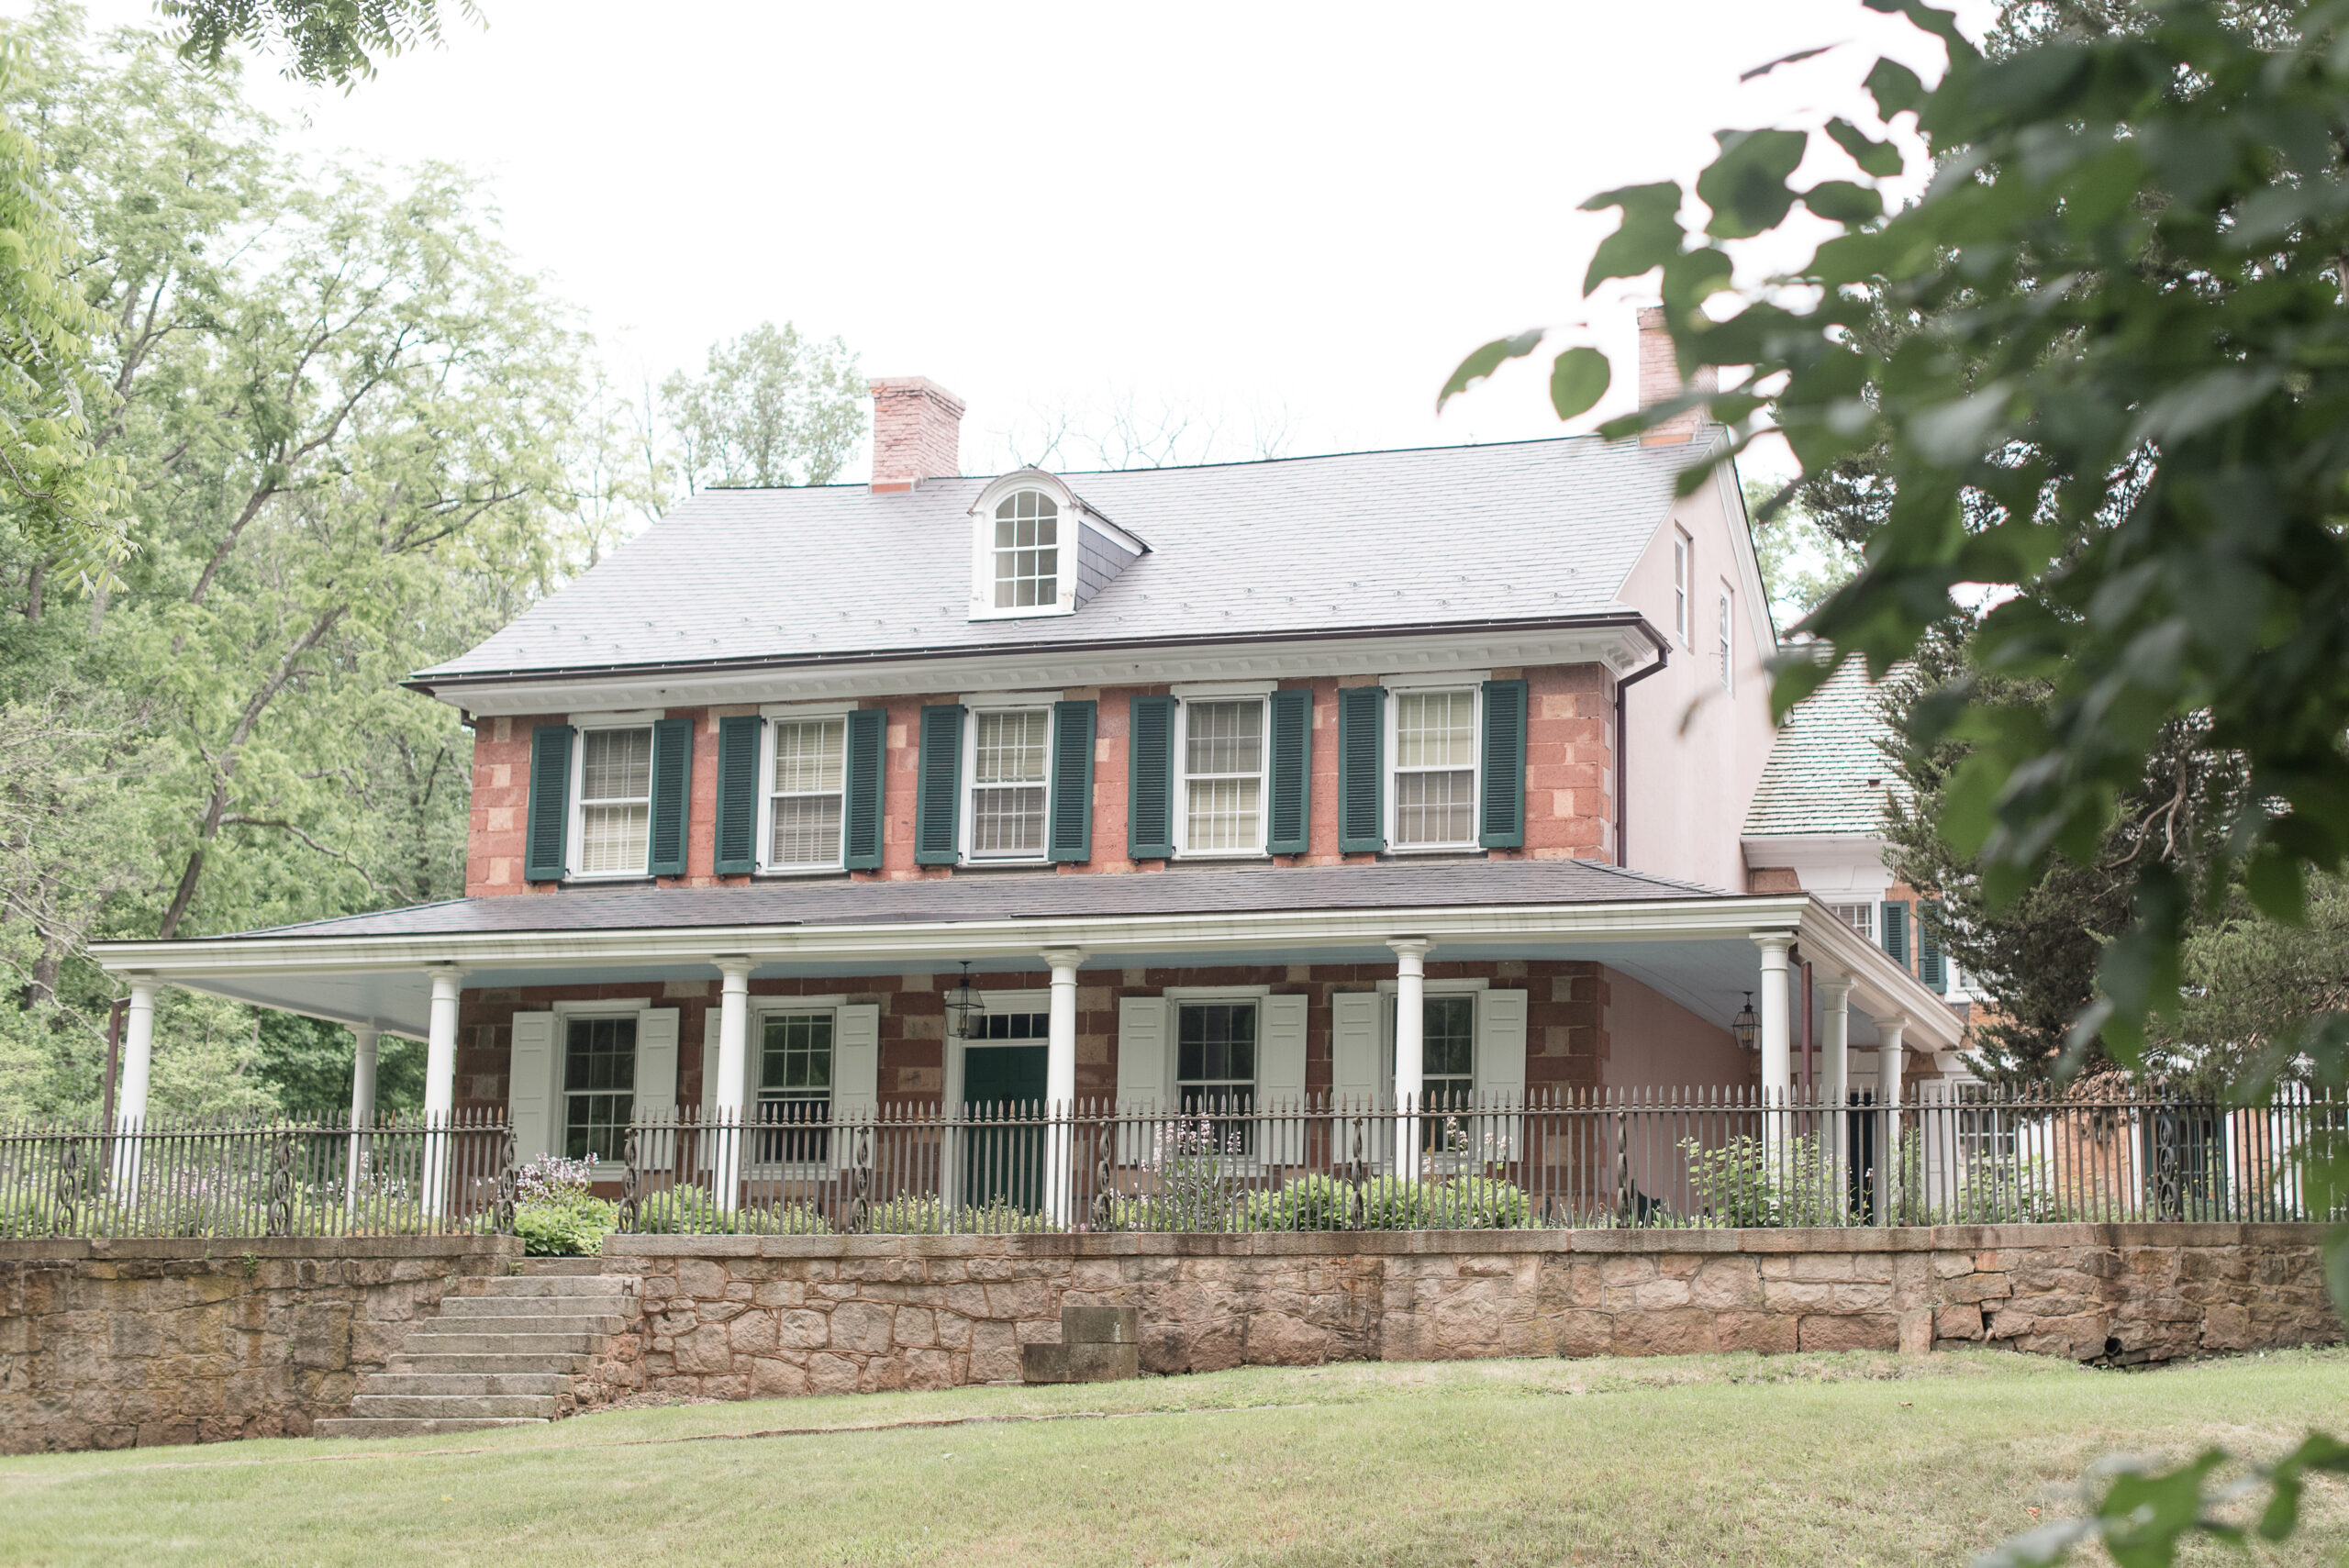 The Stiegel-Coleman House is one of Elizabeth Furnace's event spaces in Lancaster, PA